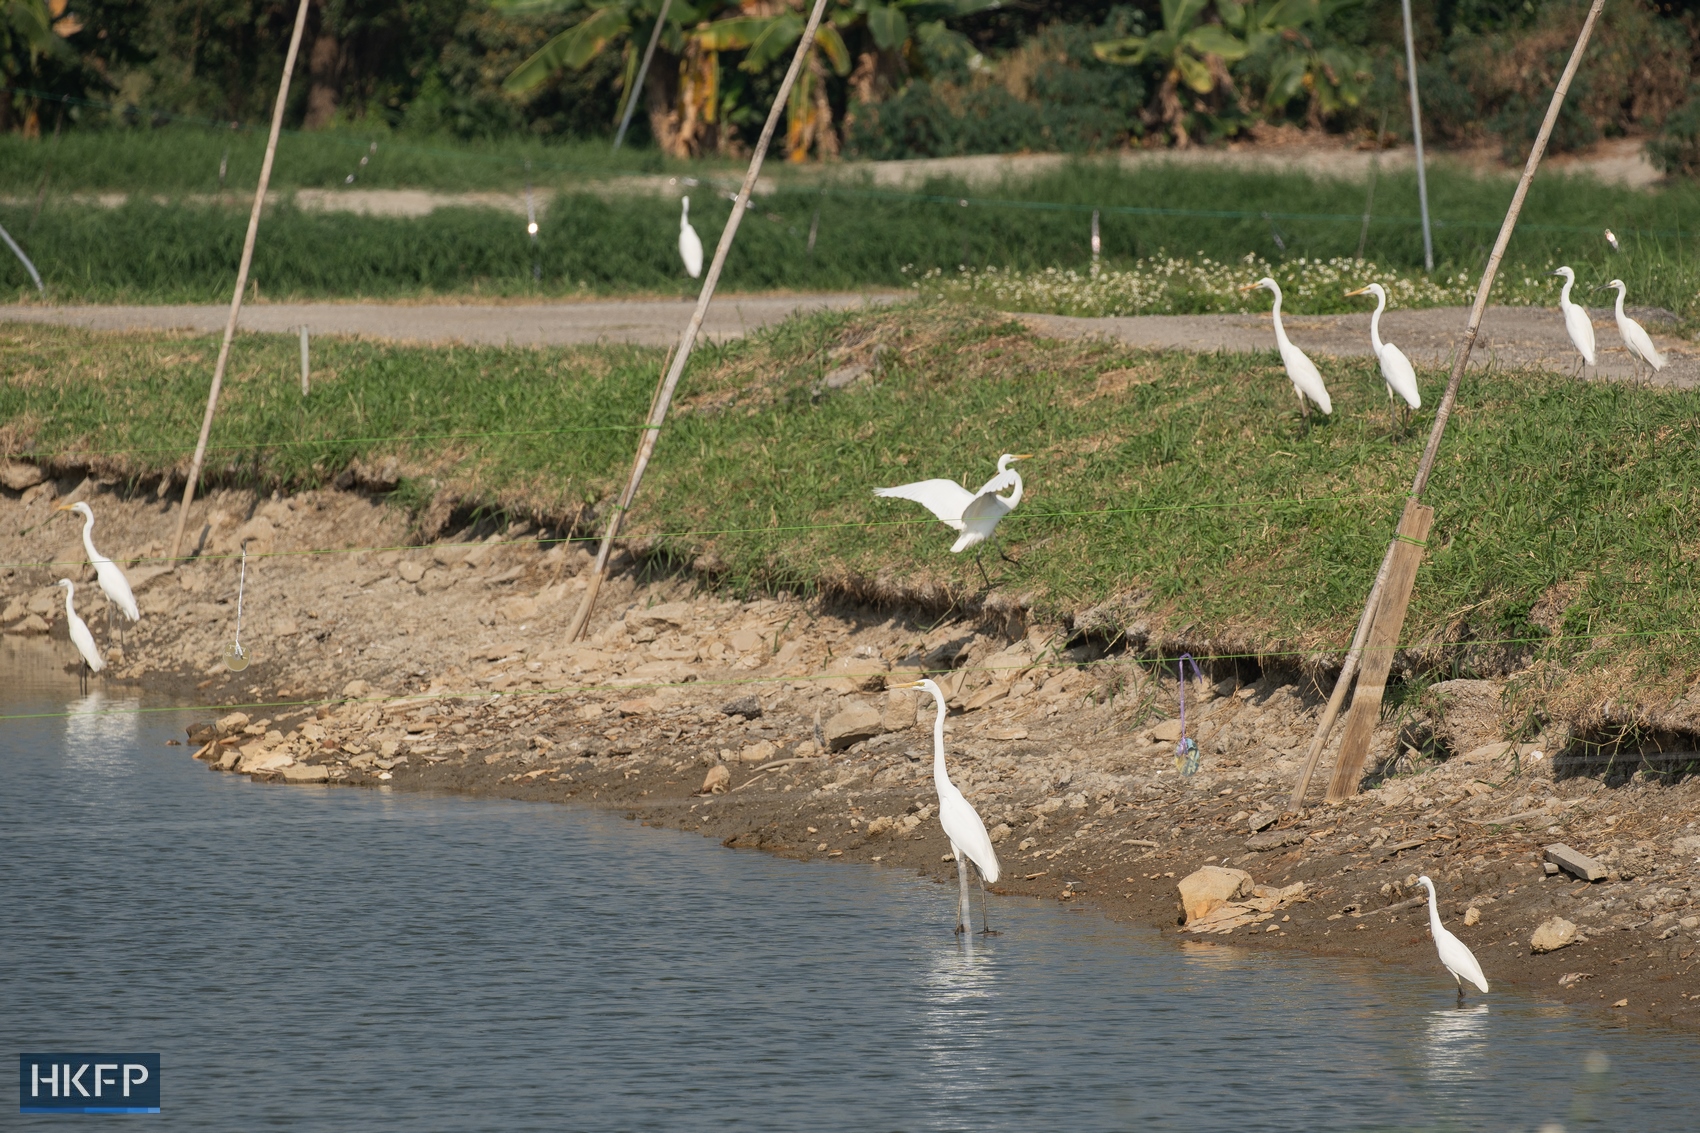 Great egret and little egret stay in a fishpond in San Tin, an area which will be redeveloped into a large-scale tech hub. Photo: Kyle Lam/HKFP.